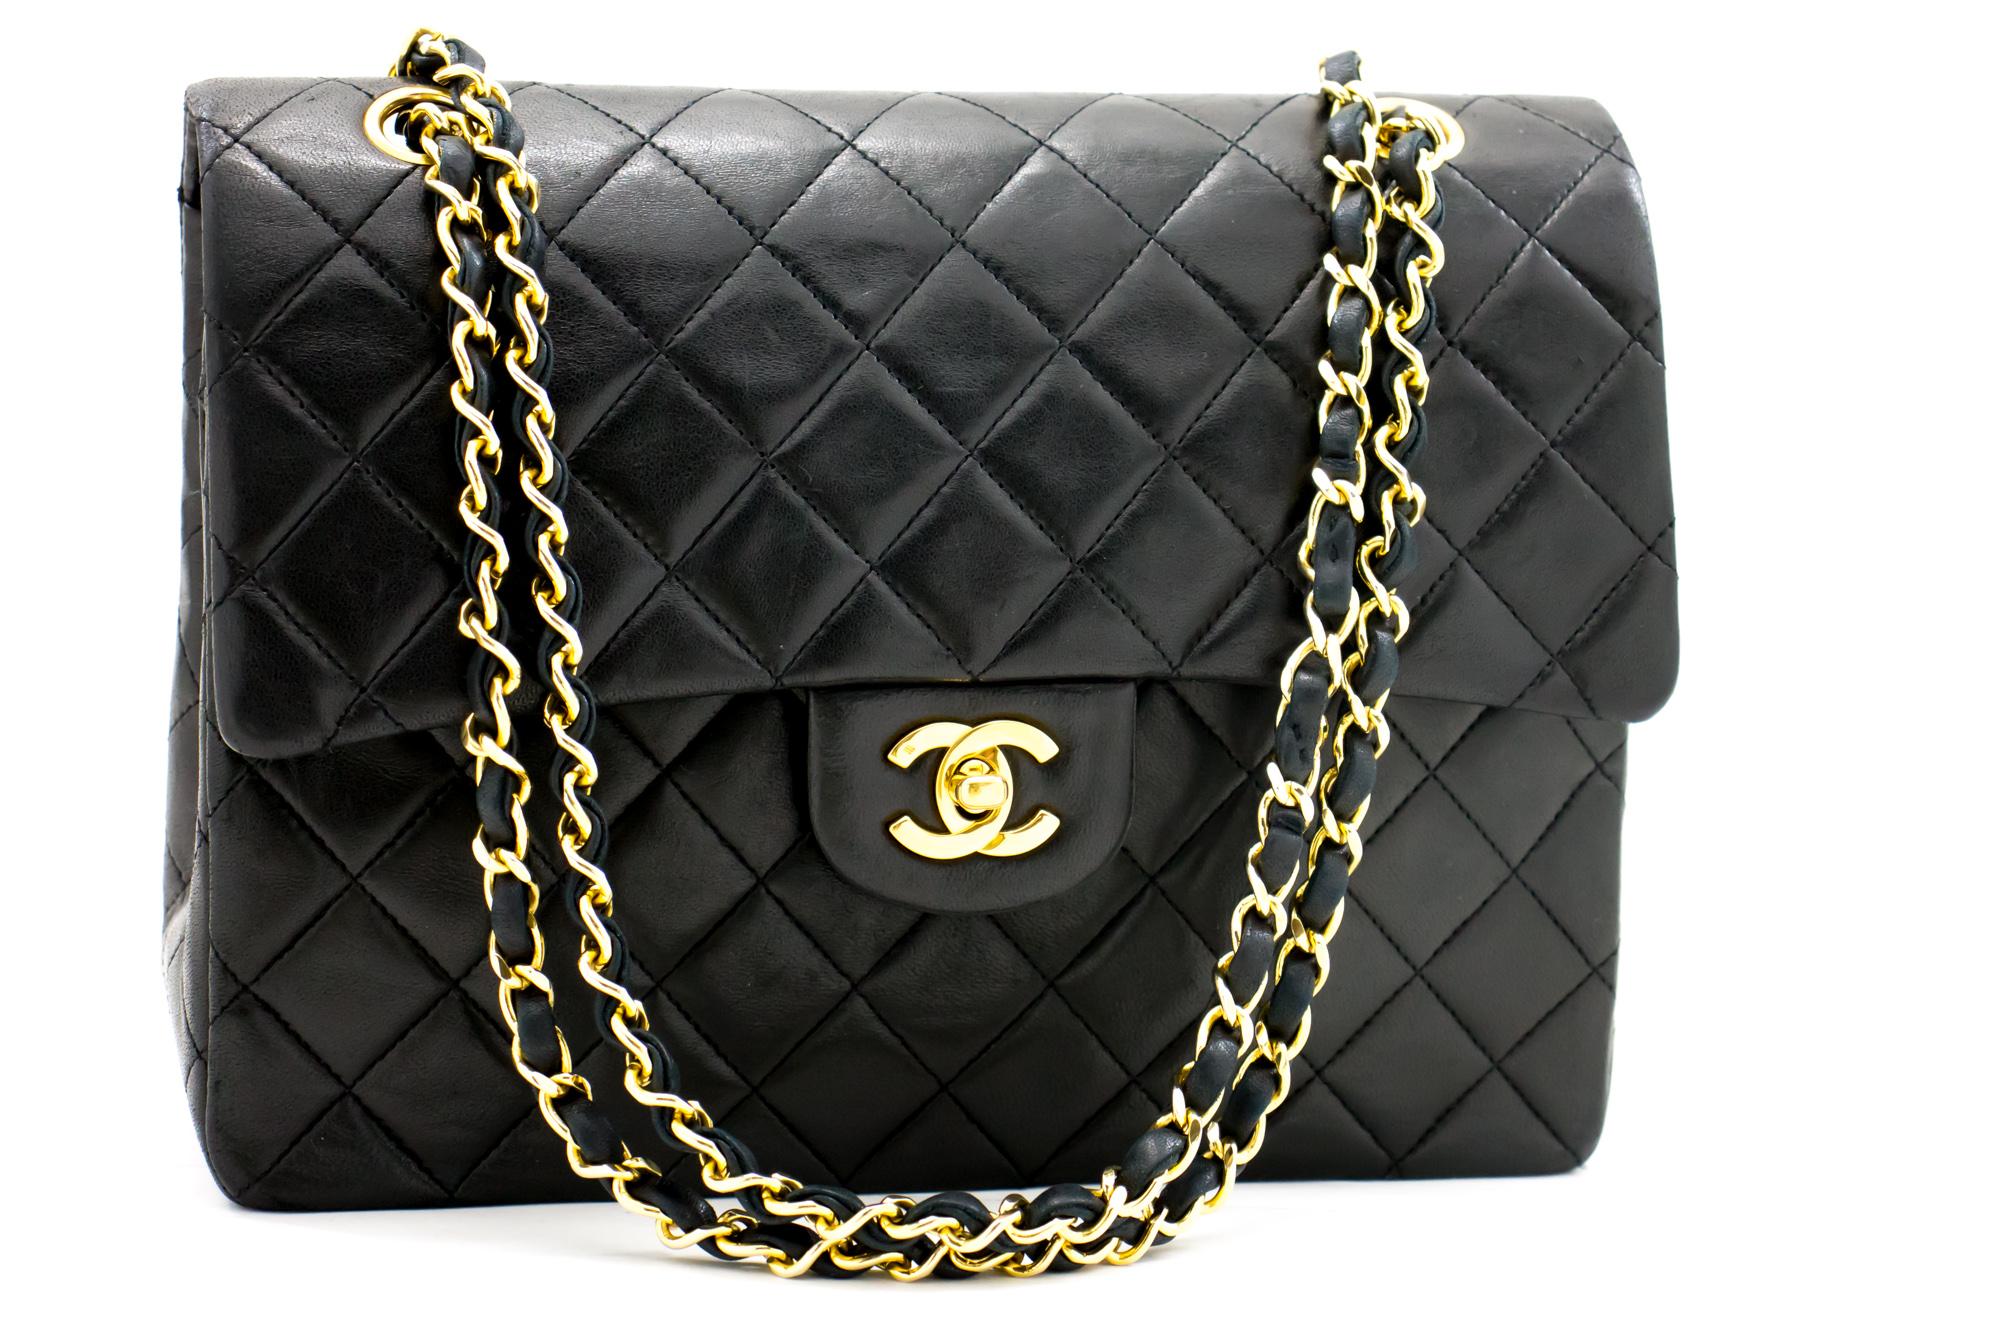 An authentic CHANEL 2.55 Classic Double Flap Square Chain Shoulder Bag Black made of black Lambskin. The color is Black. The outside material is Leather. The pattern is Solid. This item is Vintage / Classic. The year of manufacture would be